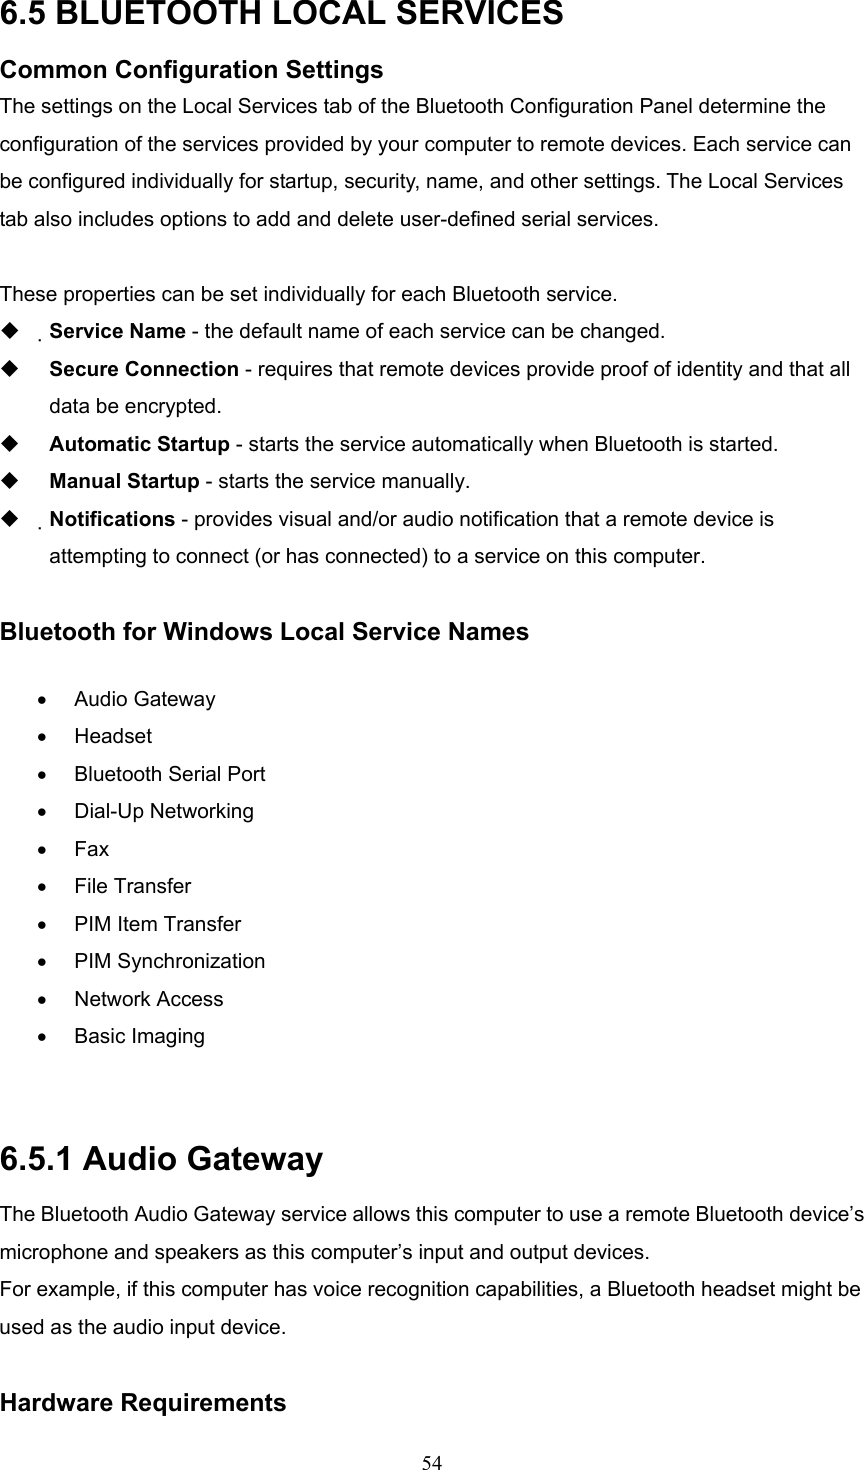  54 6.5 BLUETOOTH LOCAL SERVICES Common Configuration Settings The settings on the Local Services tab of the Bluetooth Configuration Panel determine the configuration of the services provided by your computer to remote devices. Each service can be configured individually for startup, security, name, and other settings. The Local Services tab also includes options to add and delete user-defined serial services.  These properties can be set individually for each Bluetooth service.   Service Name - the default name of each service can be changed.   Secure Connection - requires that remote devices provide proof of identity and that all data be encrypted.   Automatic Startup - starts the service automatically when Bluetooth is started.   Manual Startup - starts the service manually.   Notifications - provides visual and/or audio notification that a remote device is attempting to connect (or has connected) to a service on this computer.  Bluetooth for Windows Local Service Names •  Audio Gateway •  Headset  •  Bluetooth Serial Port •  Dial-Up Networking •  Fax •  File Transfer •  PIM Item Transfer •  PIM Synchronization •  Network Access •  Basic Imaging    6.5.1 Audio Gateway The Bluetooth Audio Gateway service allows this computer to use a remote Bluetooth device’s microphone and speakers as this computer’s input and output devices. For example, if this computer has voice recognition capabilities, a Bluetooth headset might be used as the audio input device.  Hardware Requirements 